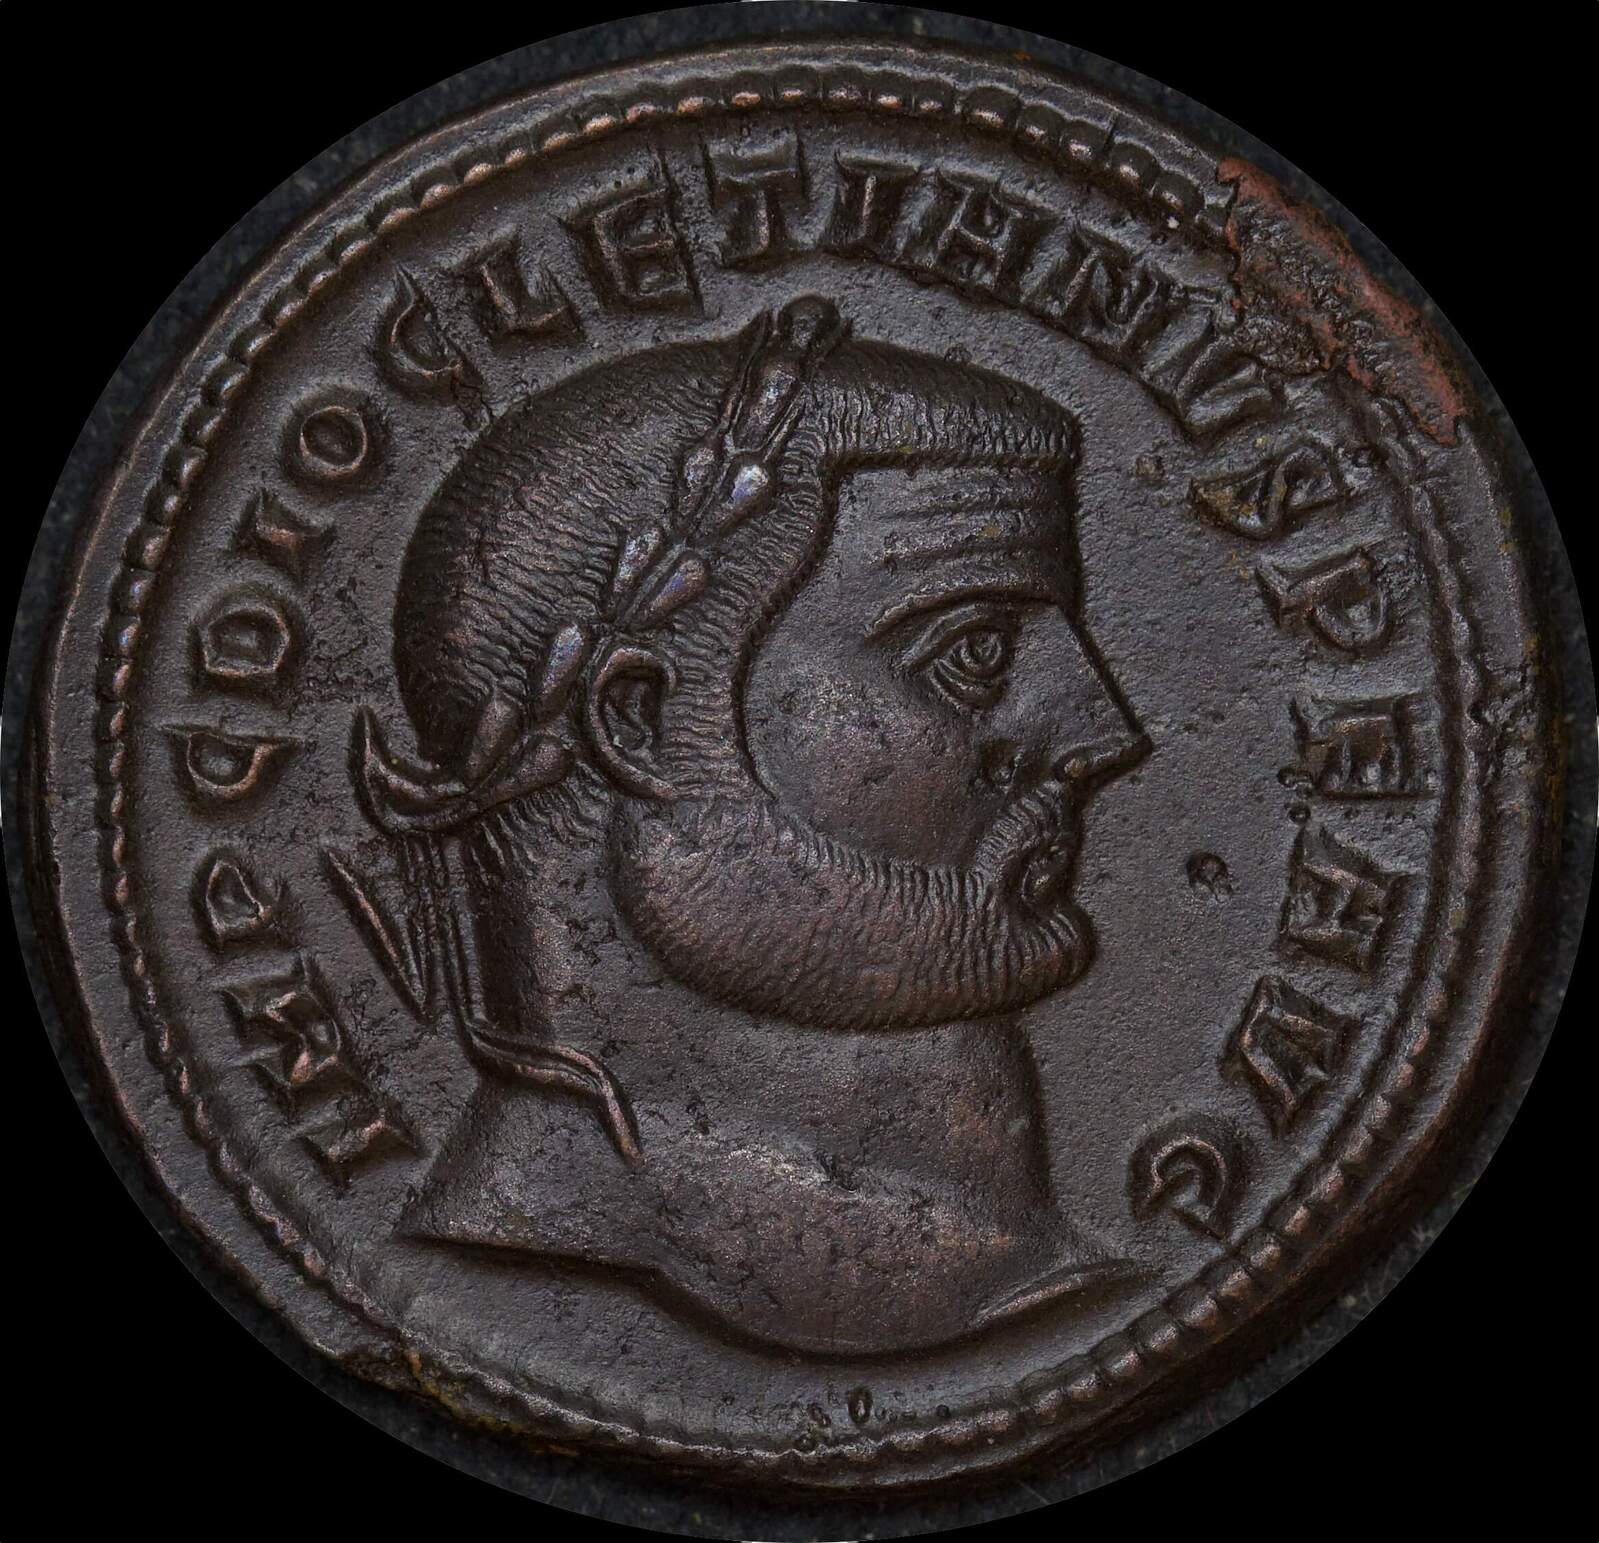 Ancient Rome (Imperial) 285-305AD Diocletian Follis AE1 RIC VI 54a Genius Extremely Fine product image